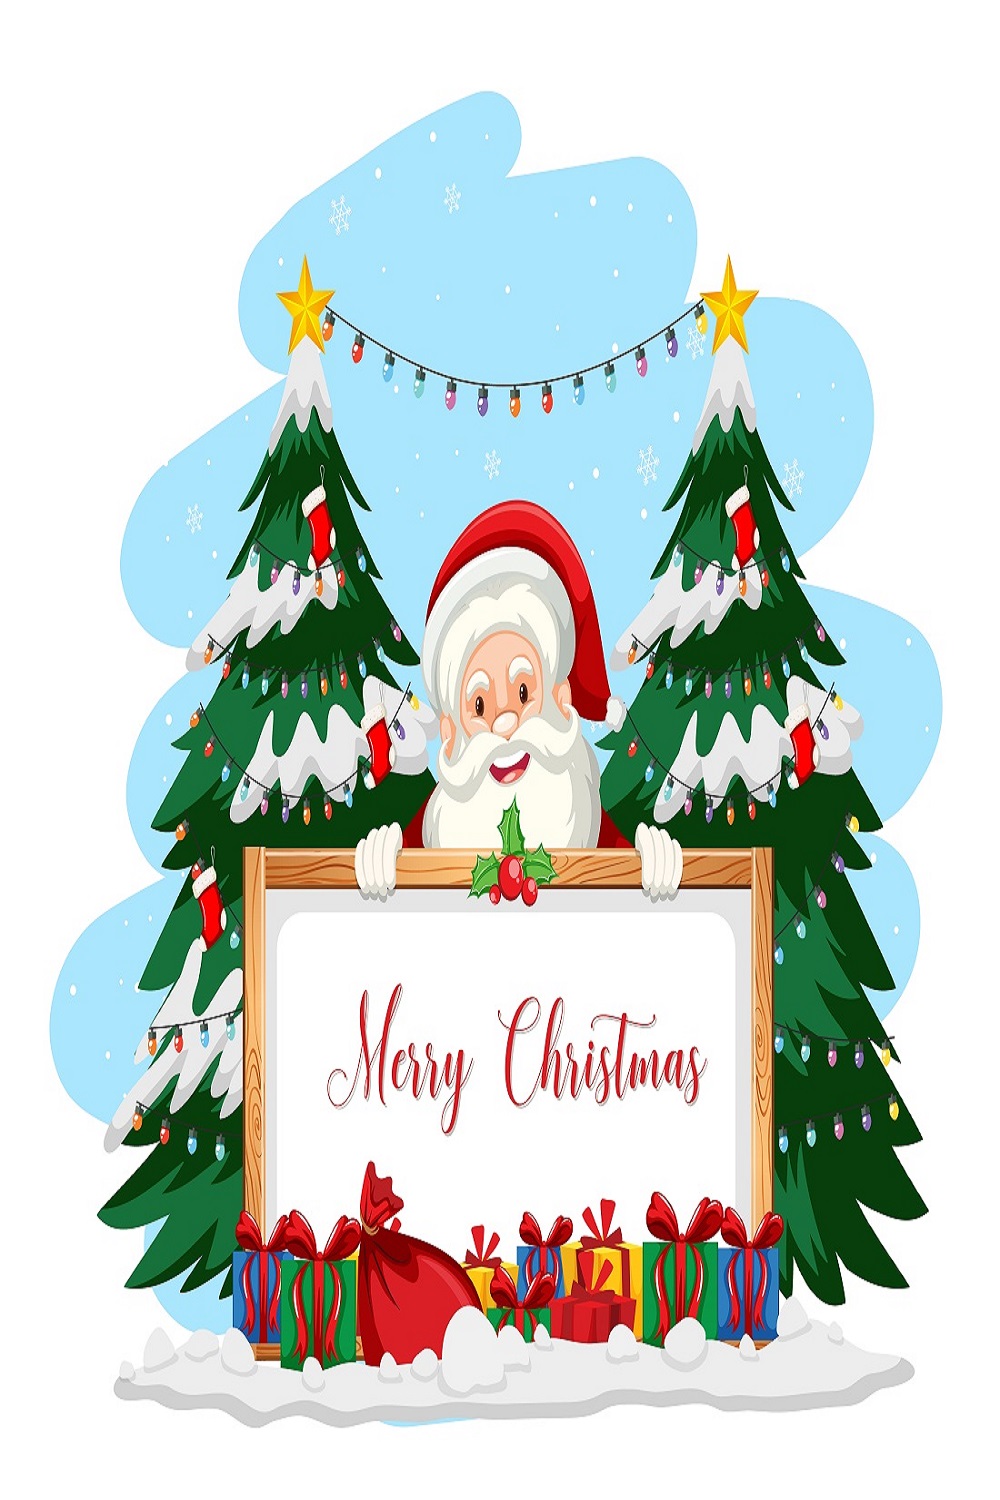 Santa Claus with merry Christmas pinterest preview image.